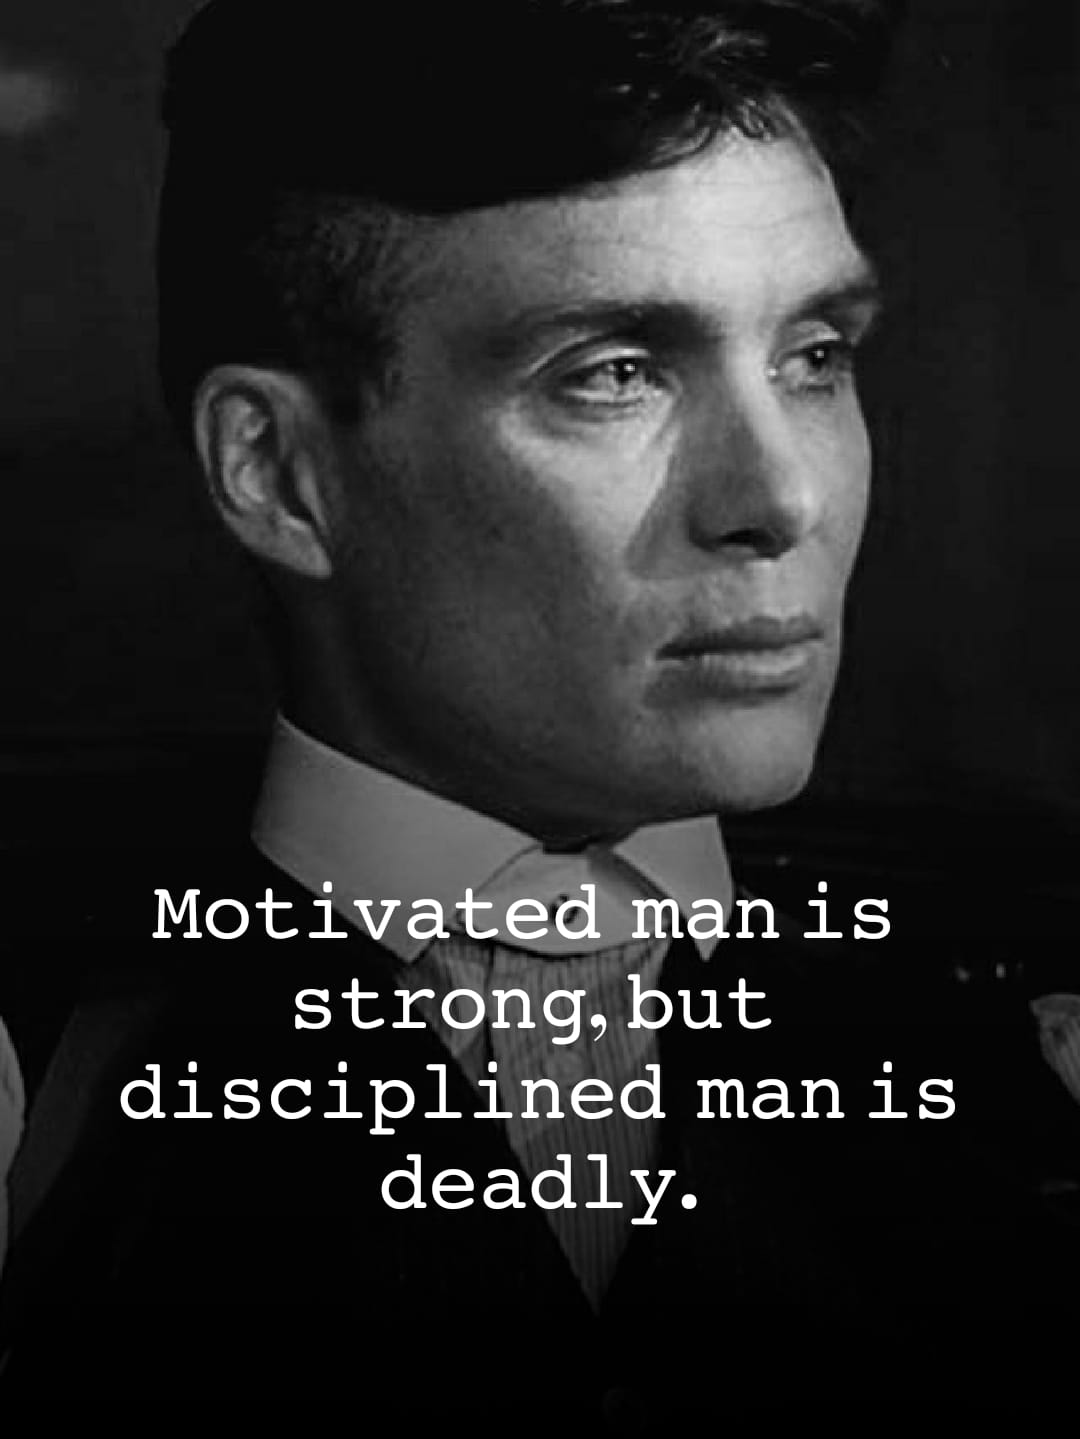 A motivated man is strong… But a disciplined man is deadly.